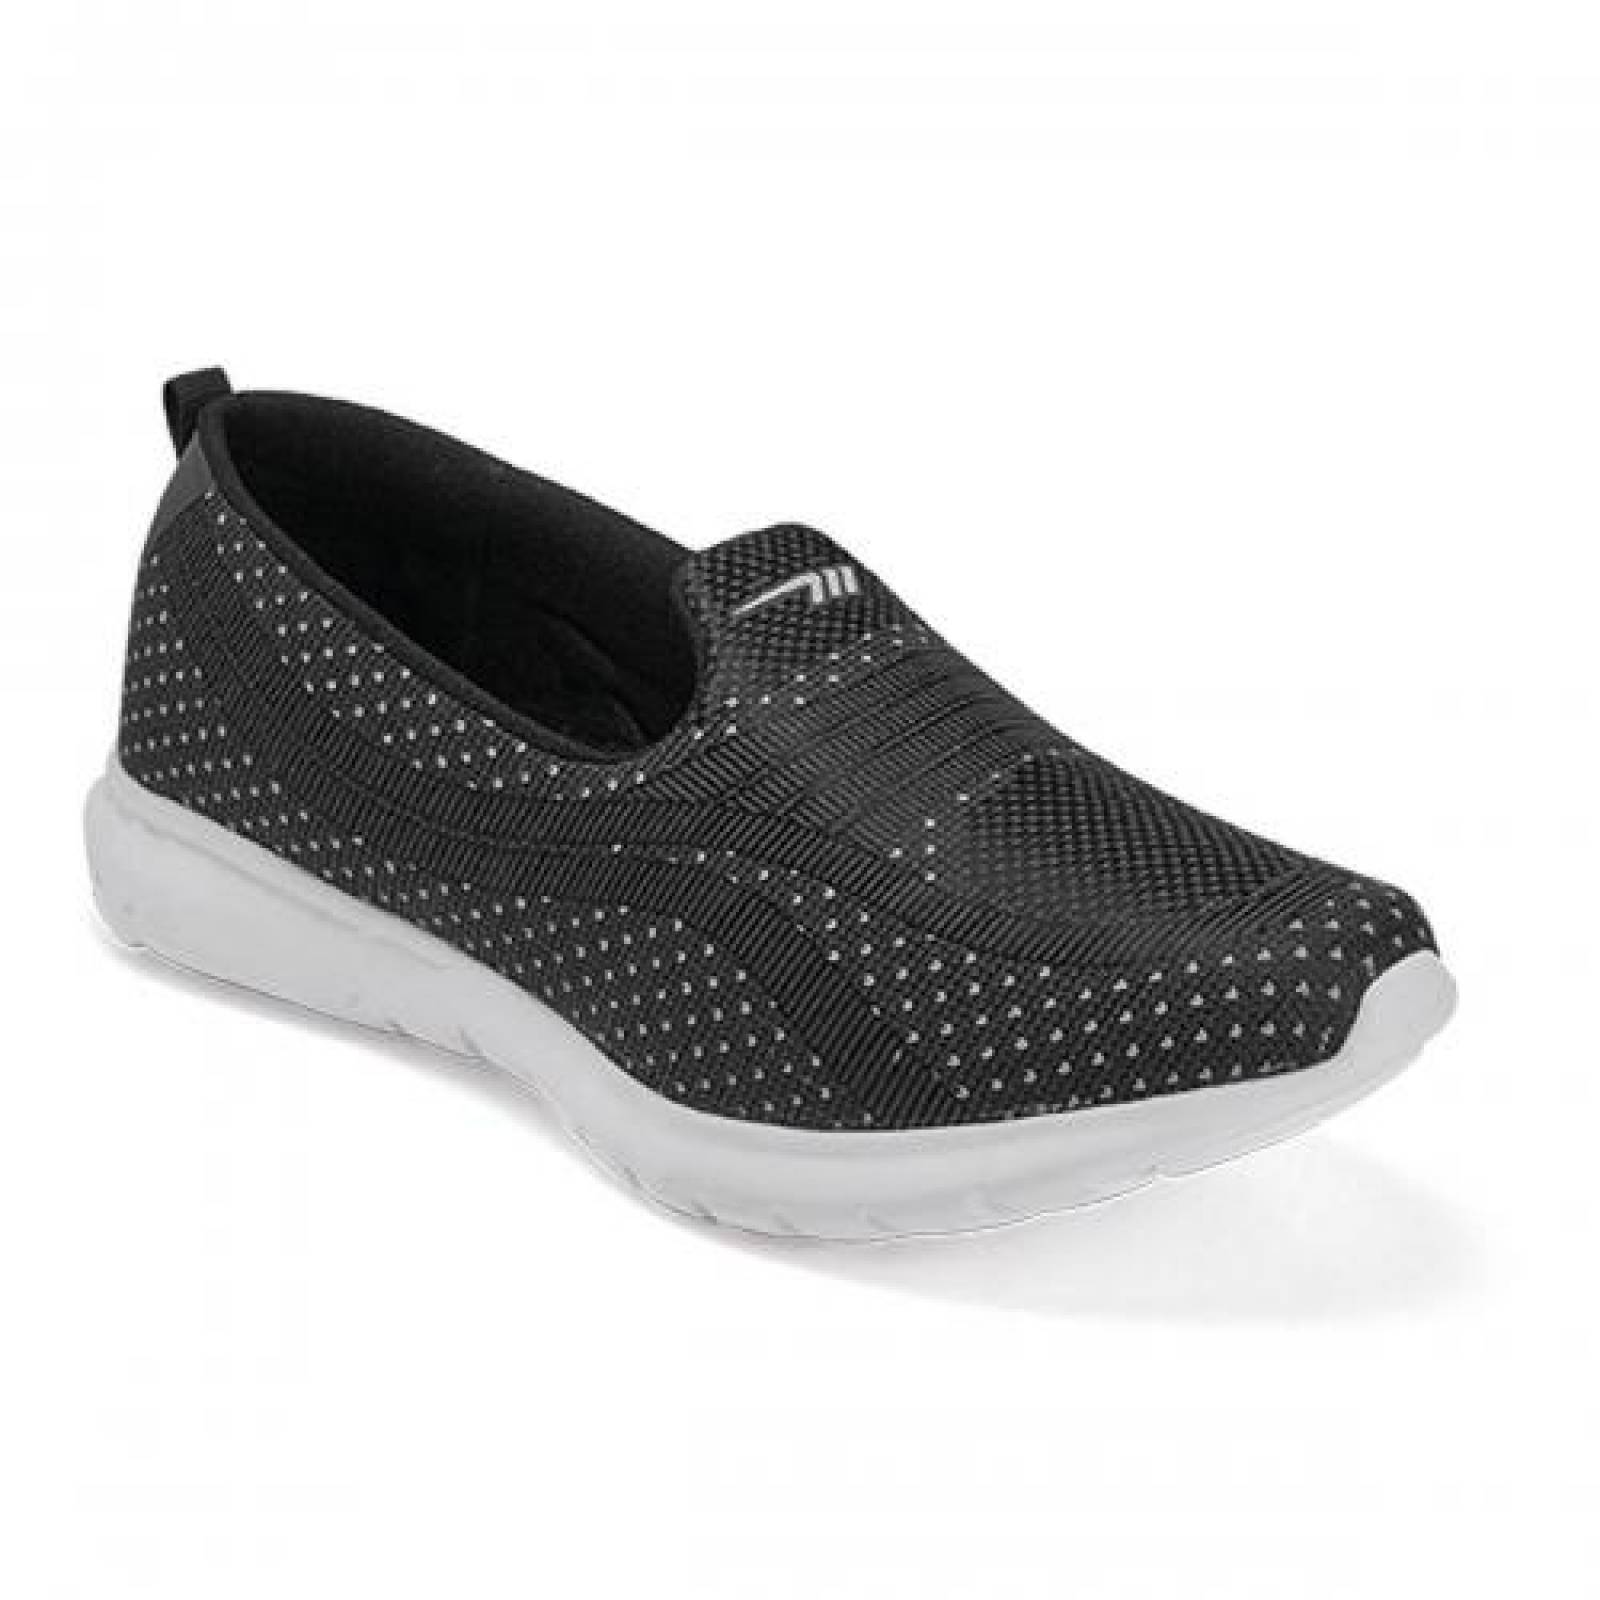 Tenis para Mujer Marcopolo 3814 055017 Color Negro gris